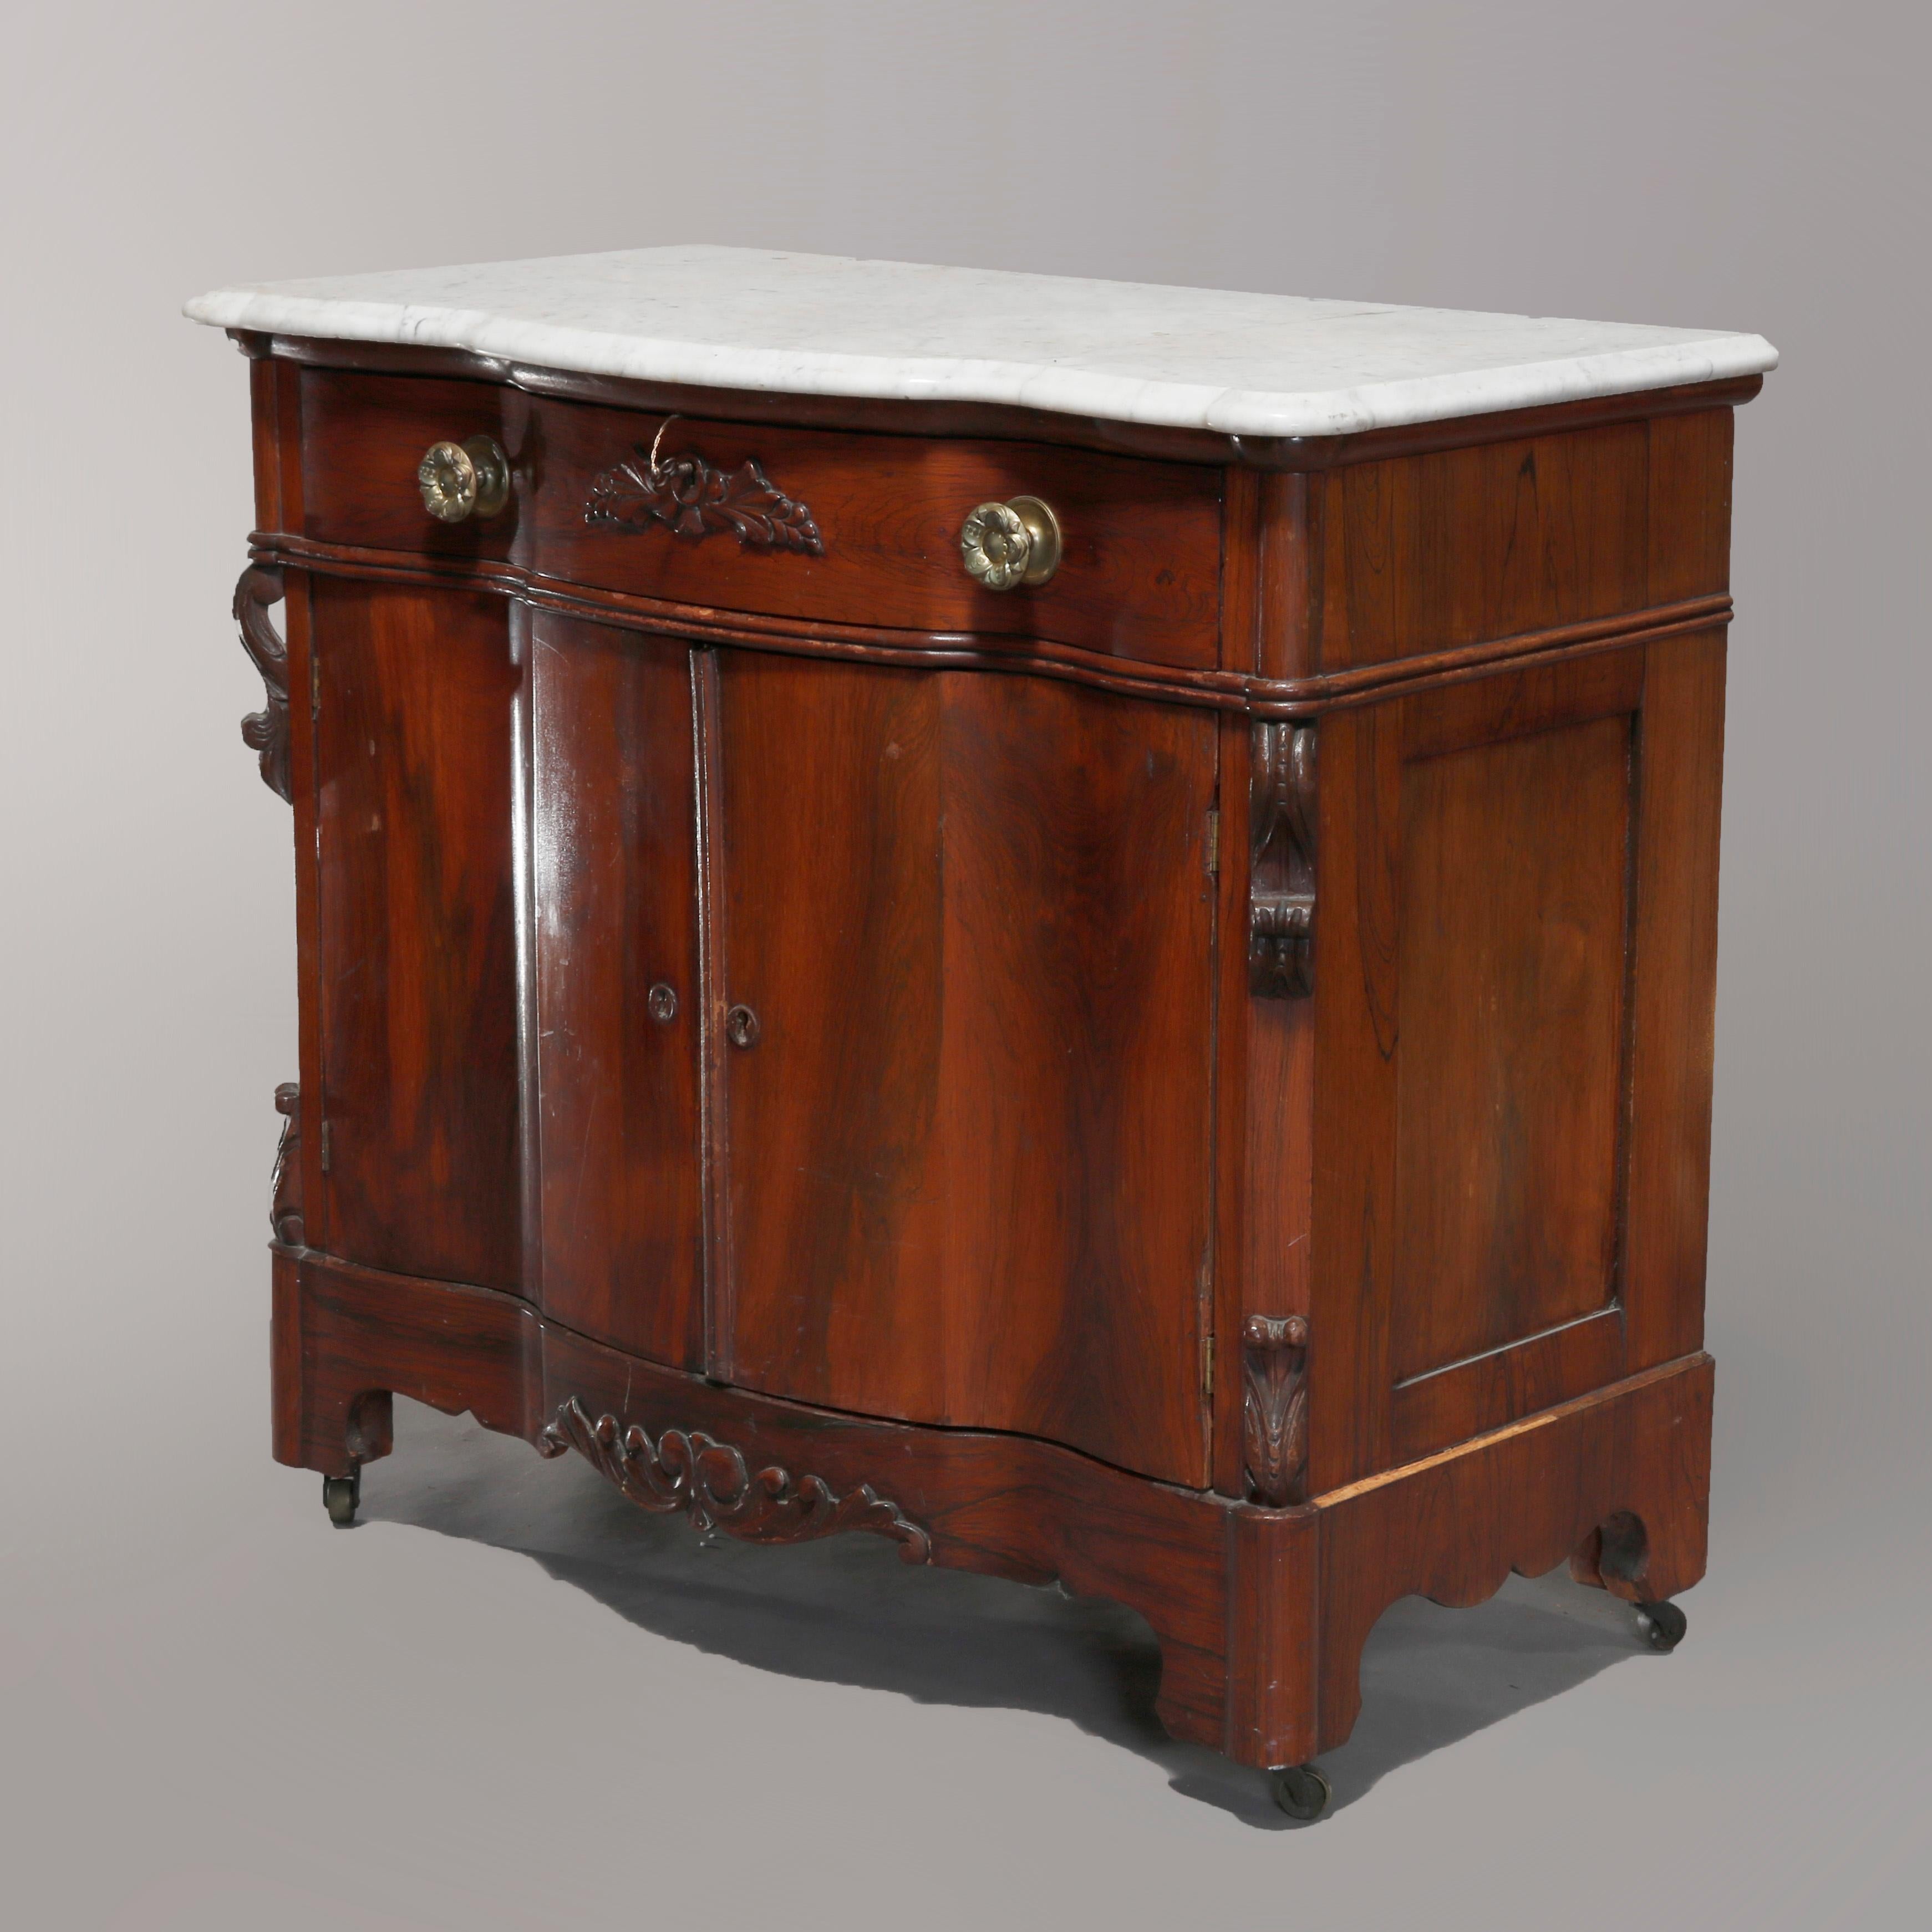 An antique Victorian Rococo commode offers rosewood construction in serpentine form with shaped marble top surmounting base with frieze drawer over double door lower cabinet, carved acanthus and foliate elements throughout, circa 1860.

Measures: